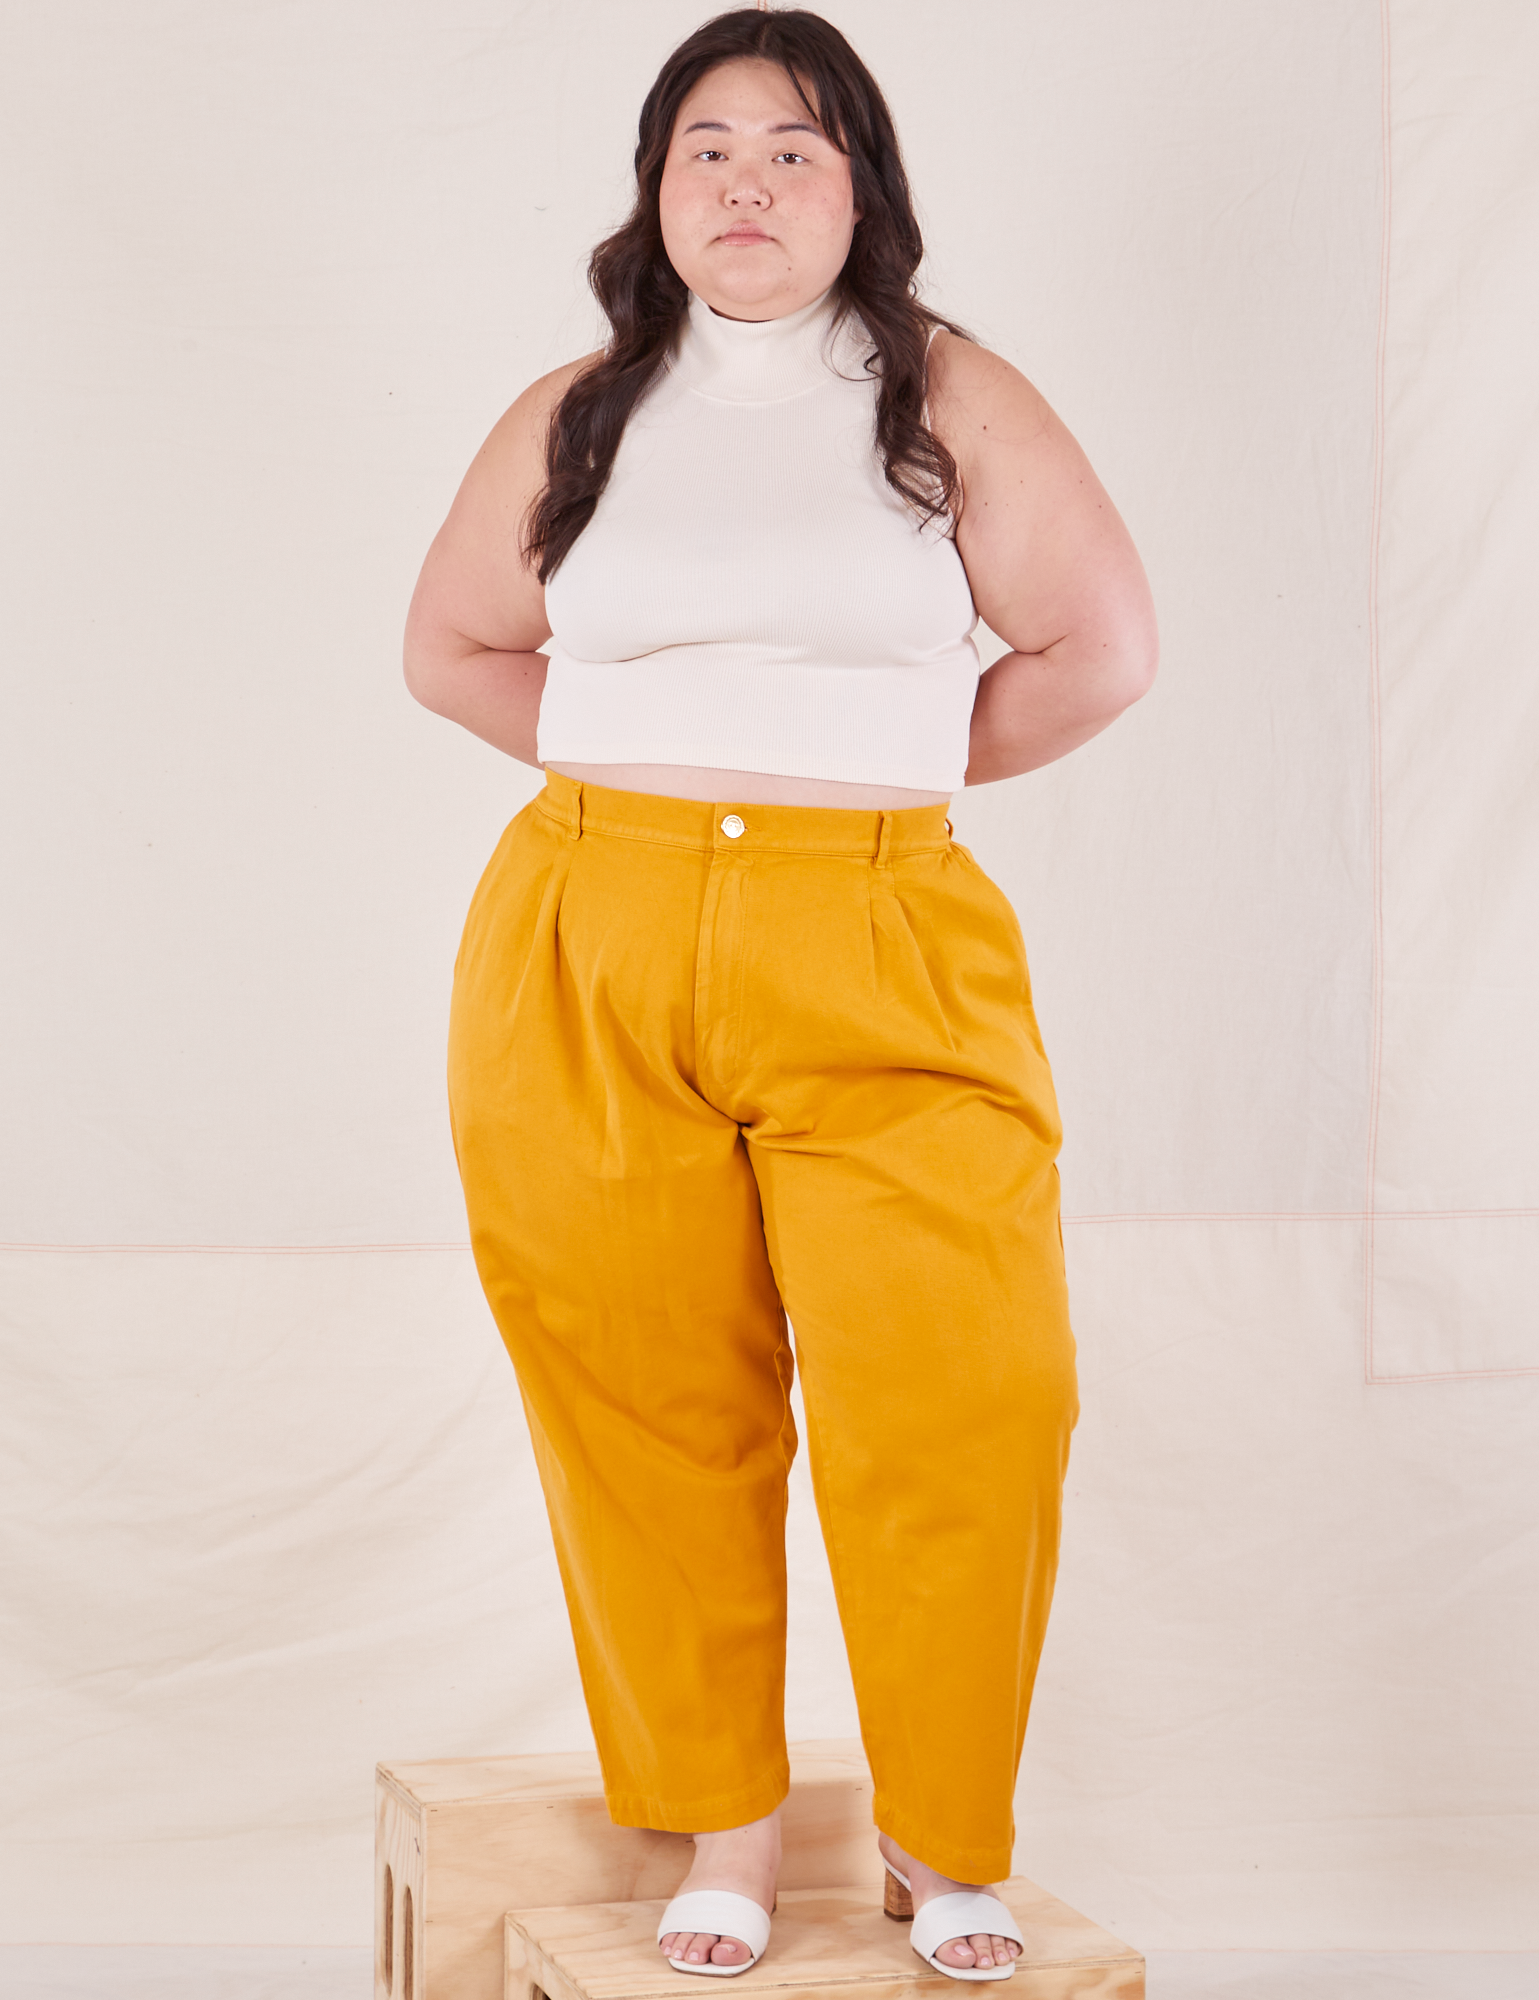 Ashley is 5&#39;7&quot; and wearing 1XL Petite Organic Trousers in Mustard Yellow paired with Sleeveless Turtleneck in vintage tee off-white